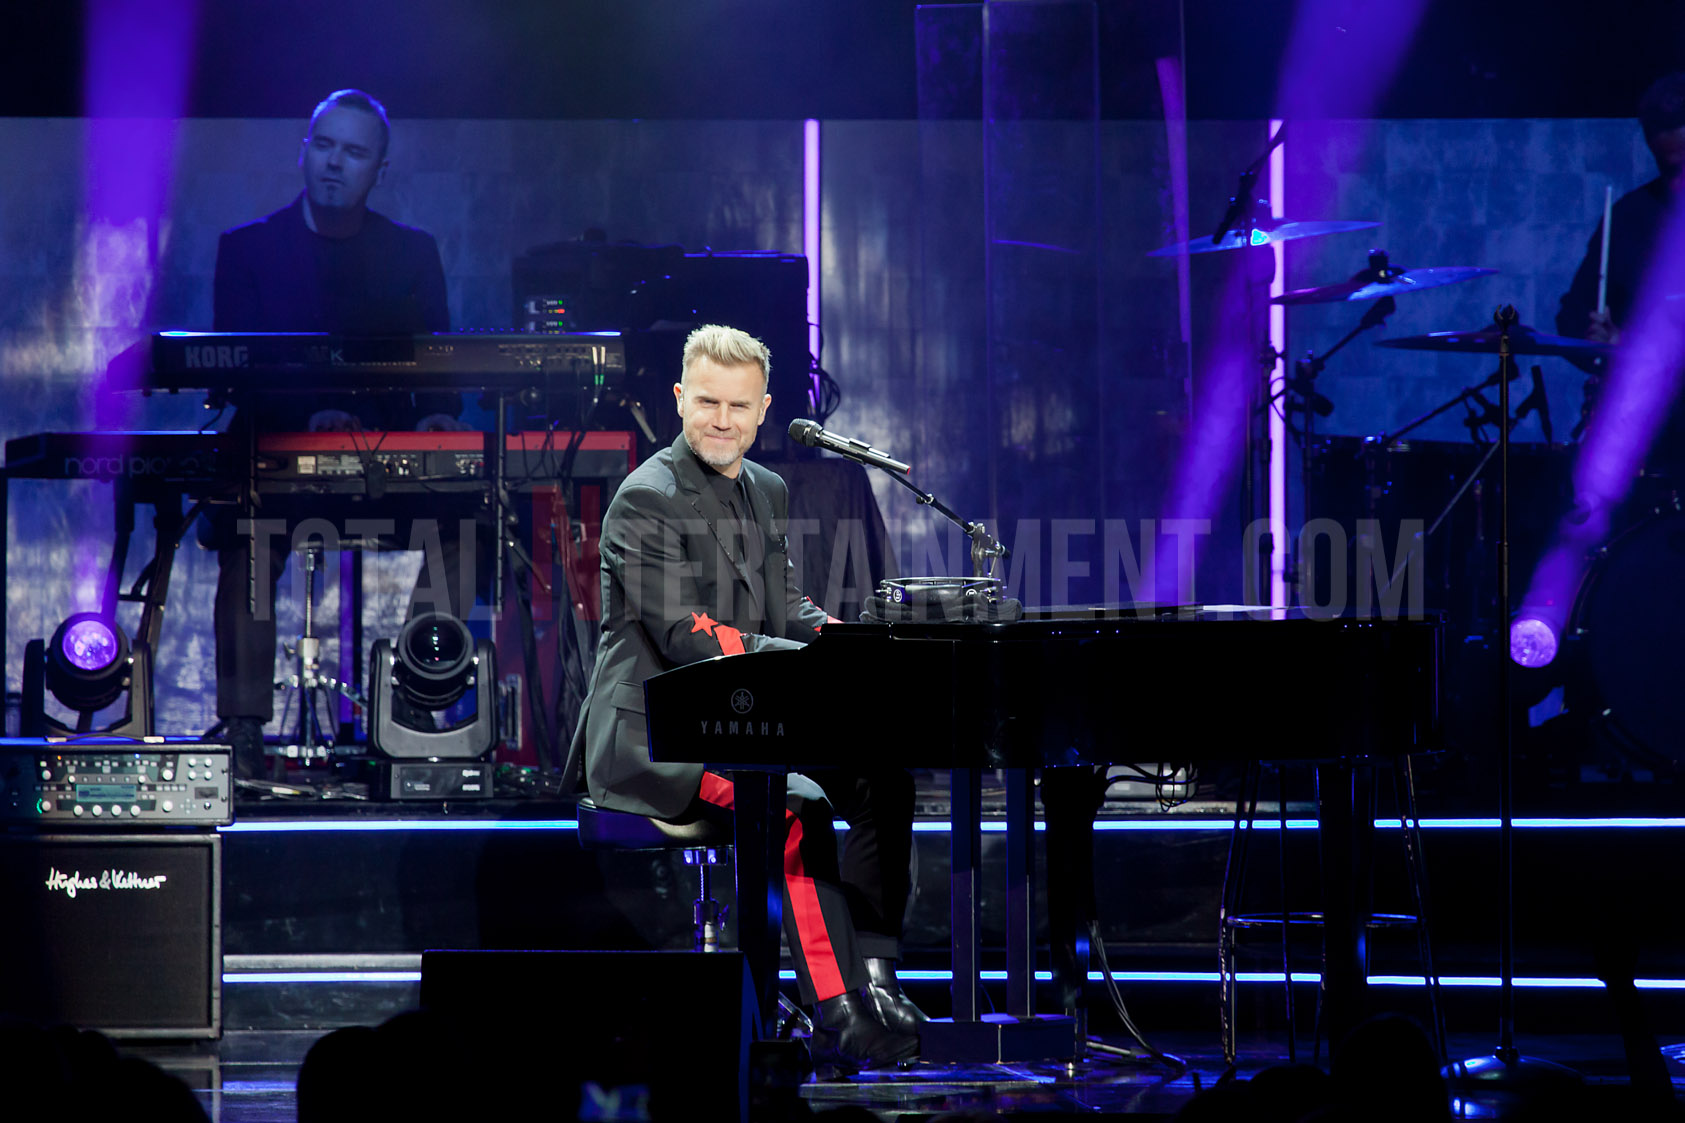 Gary Barlow, Manchester, totalntertainment, Jo Forrest, Theatre tour, Take That